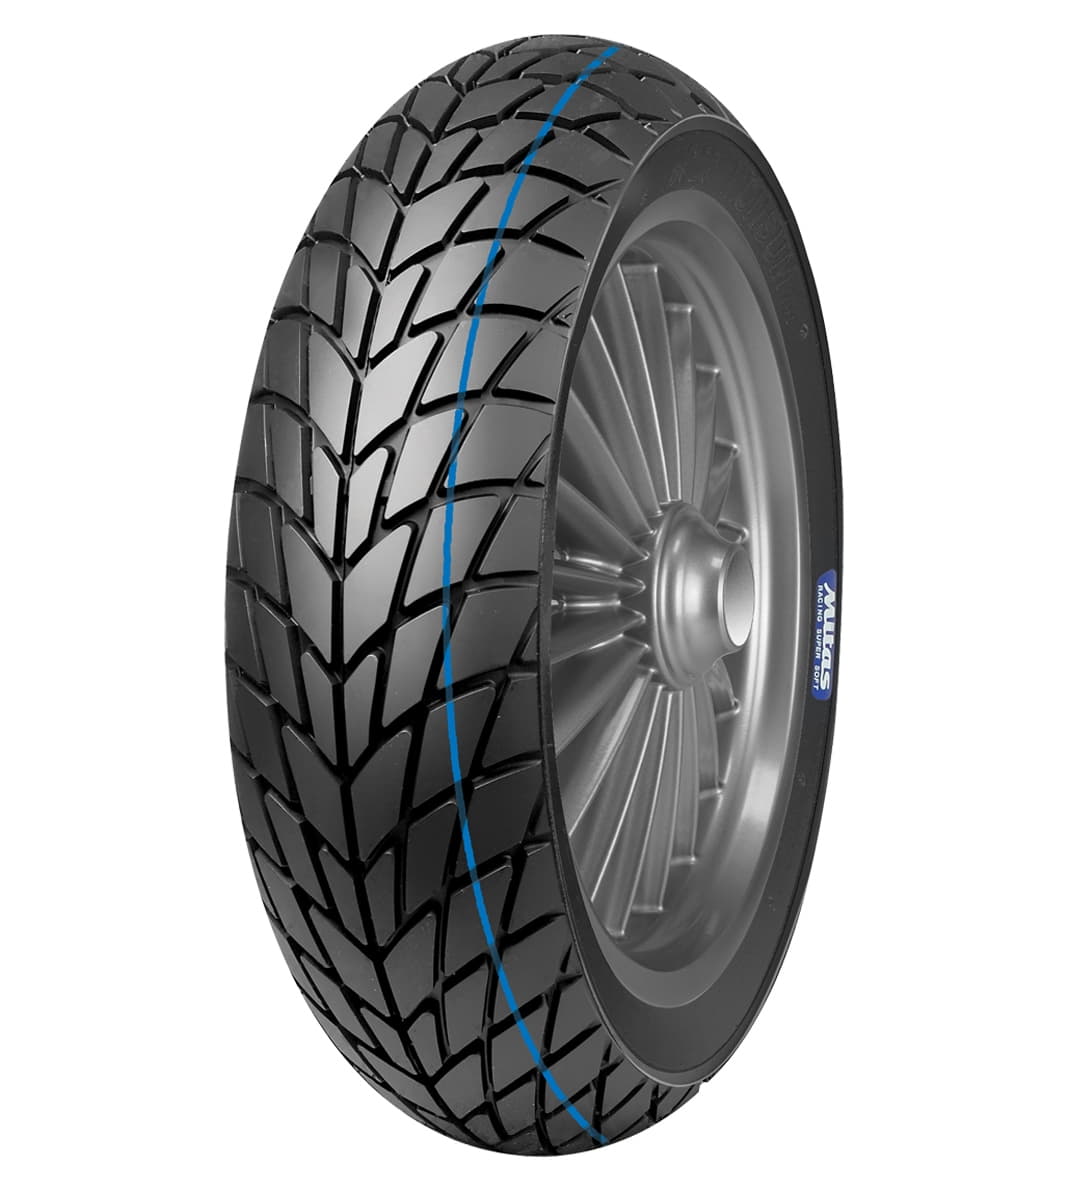 Mitas MC 32 MONSUM 120/80-12 Scooter Racing SUPER SOFT 55P Blue Tubeless Front, Rear Tire Motorcycle Tires Mitas 